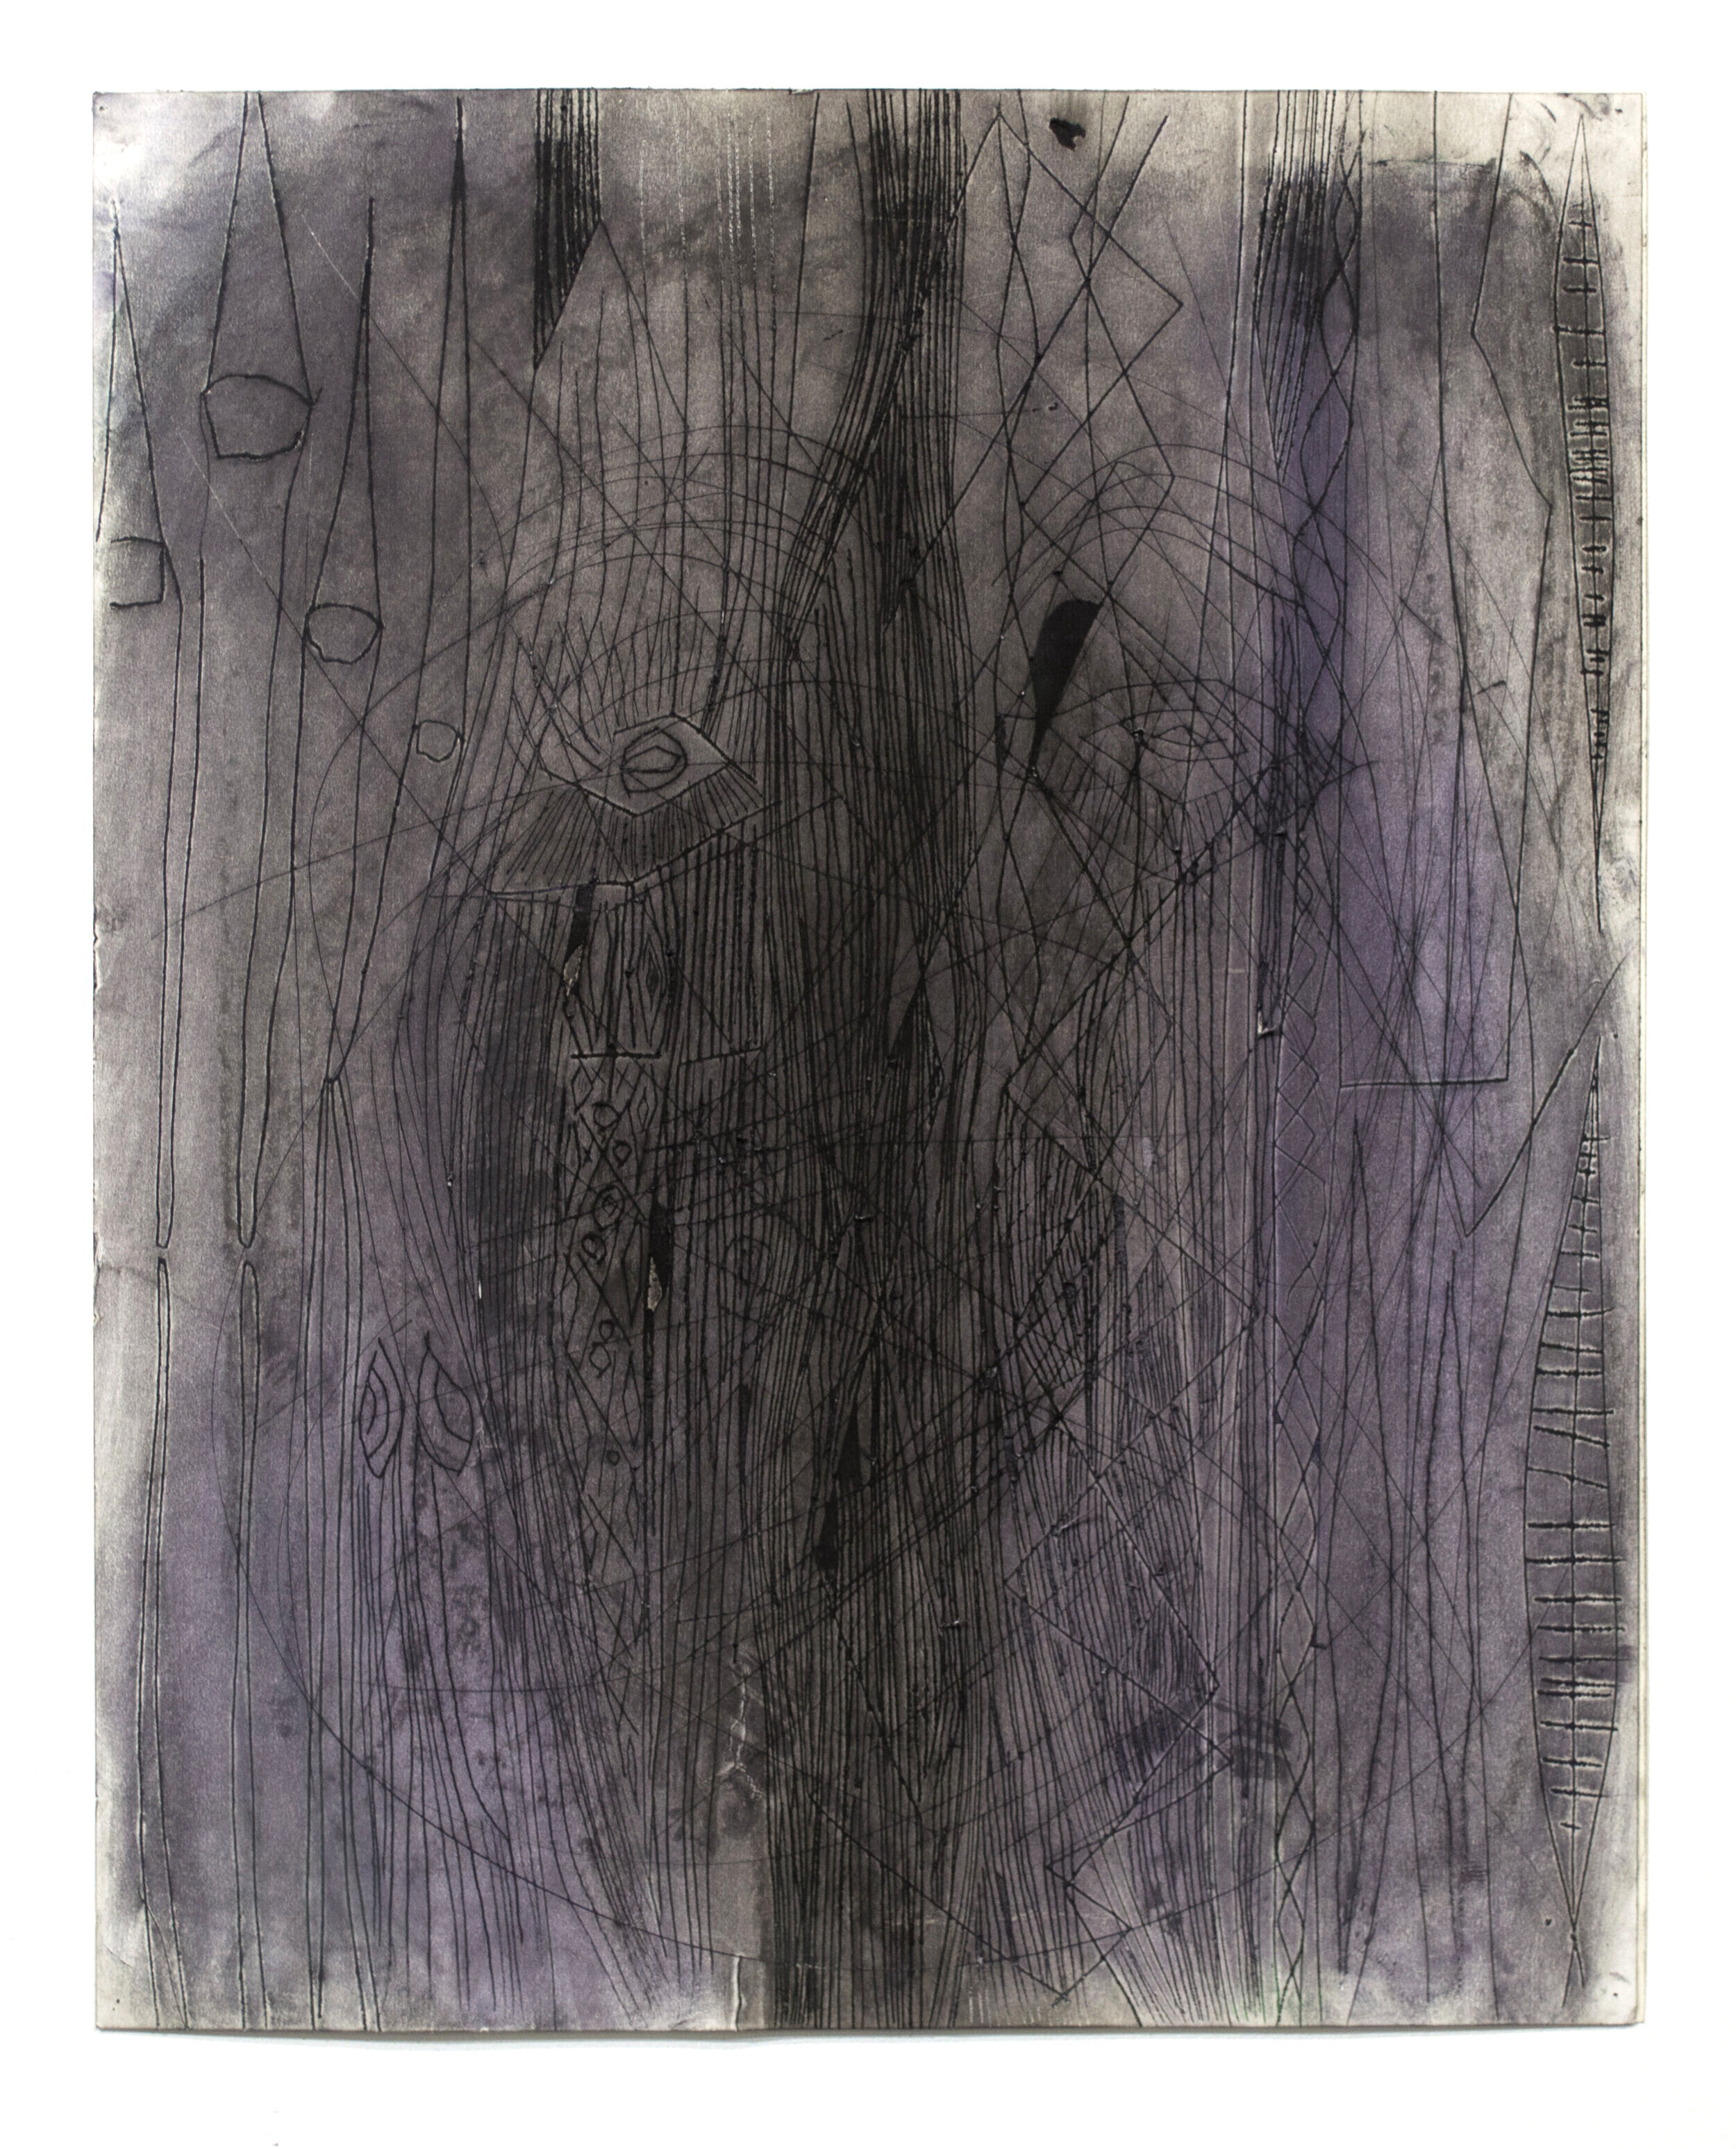 Untitled, 2018 - Charcoal, dust, pigment on etched paper - 30 x 20 inches